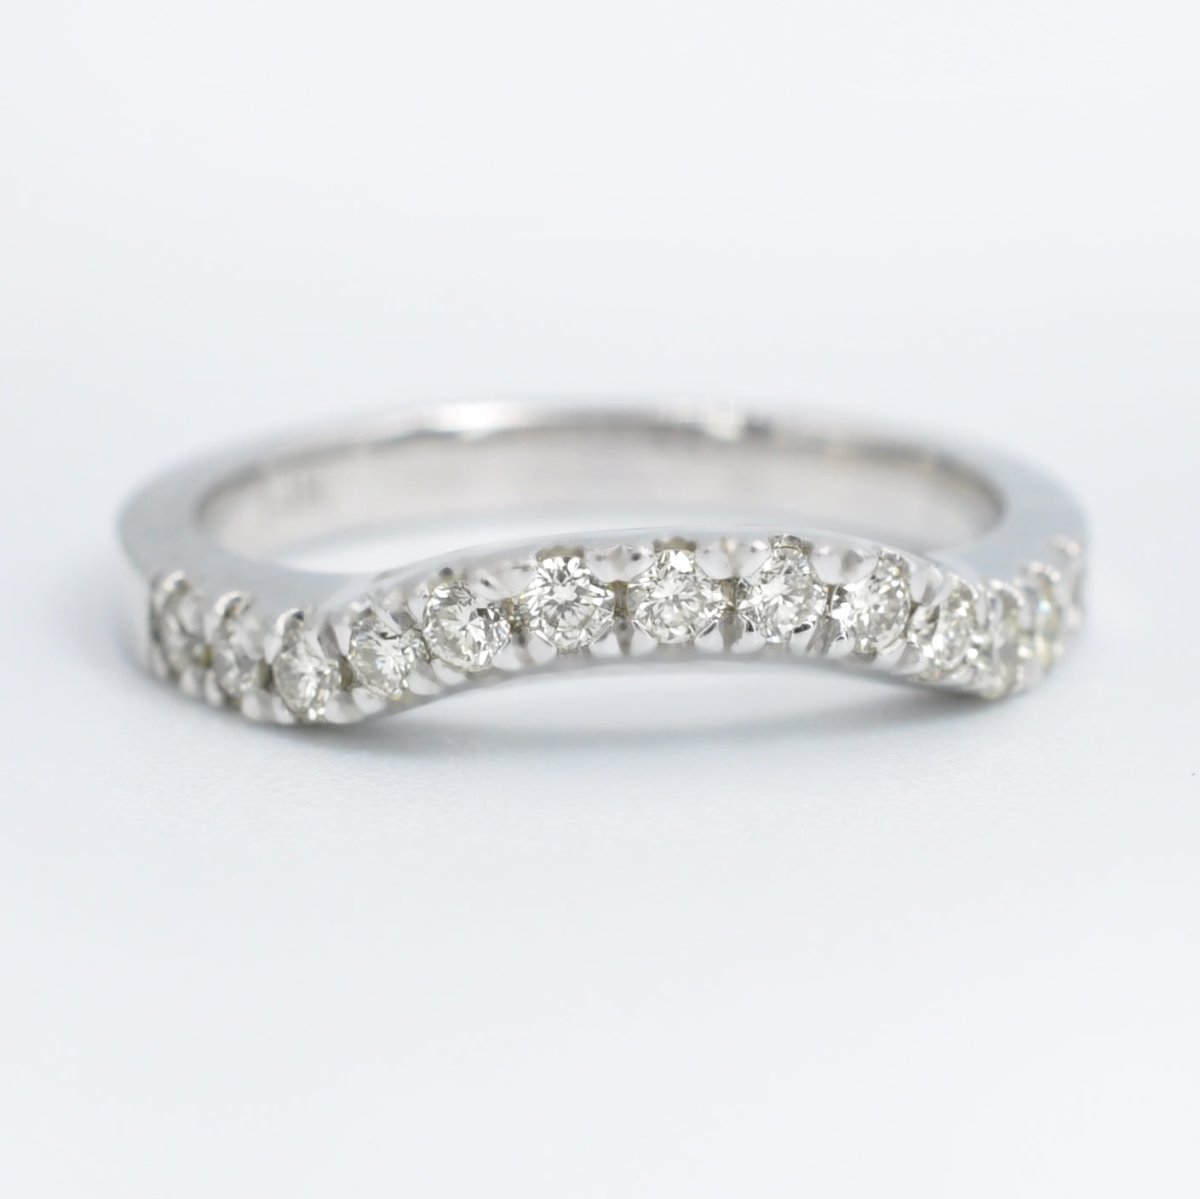 Fashionable 0.30 CT Round Cut Diamond Wedding Band in 14KT White Gold - Primestyle.com